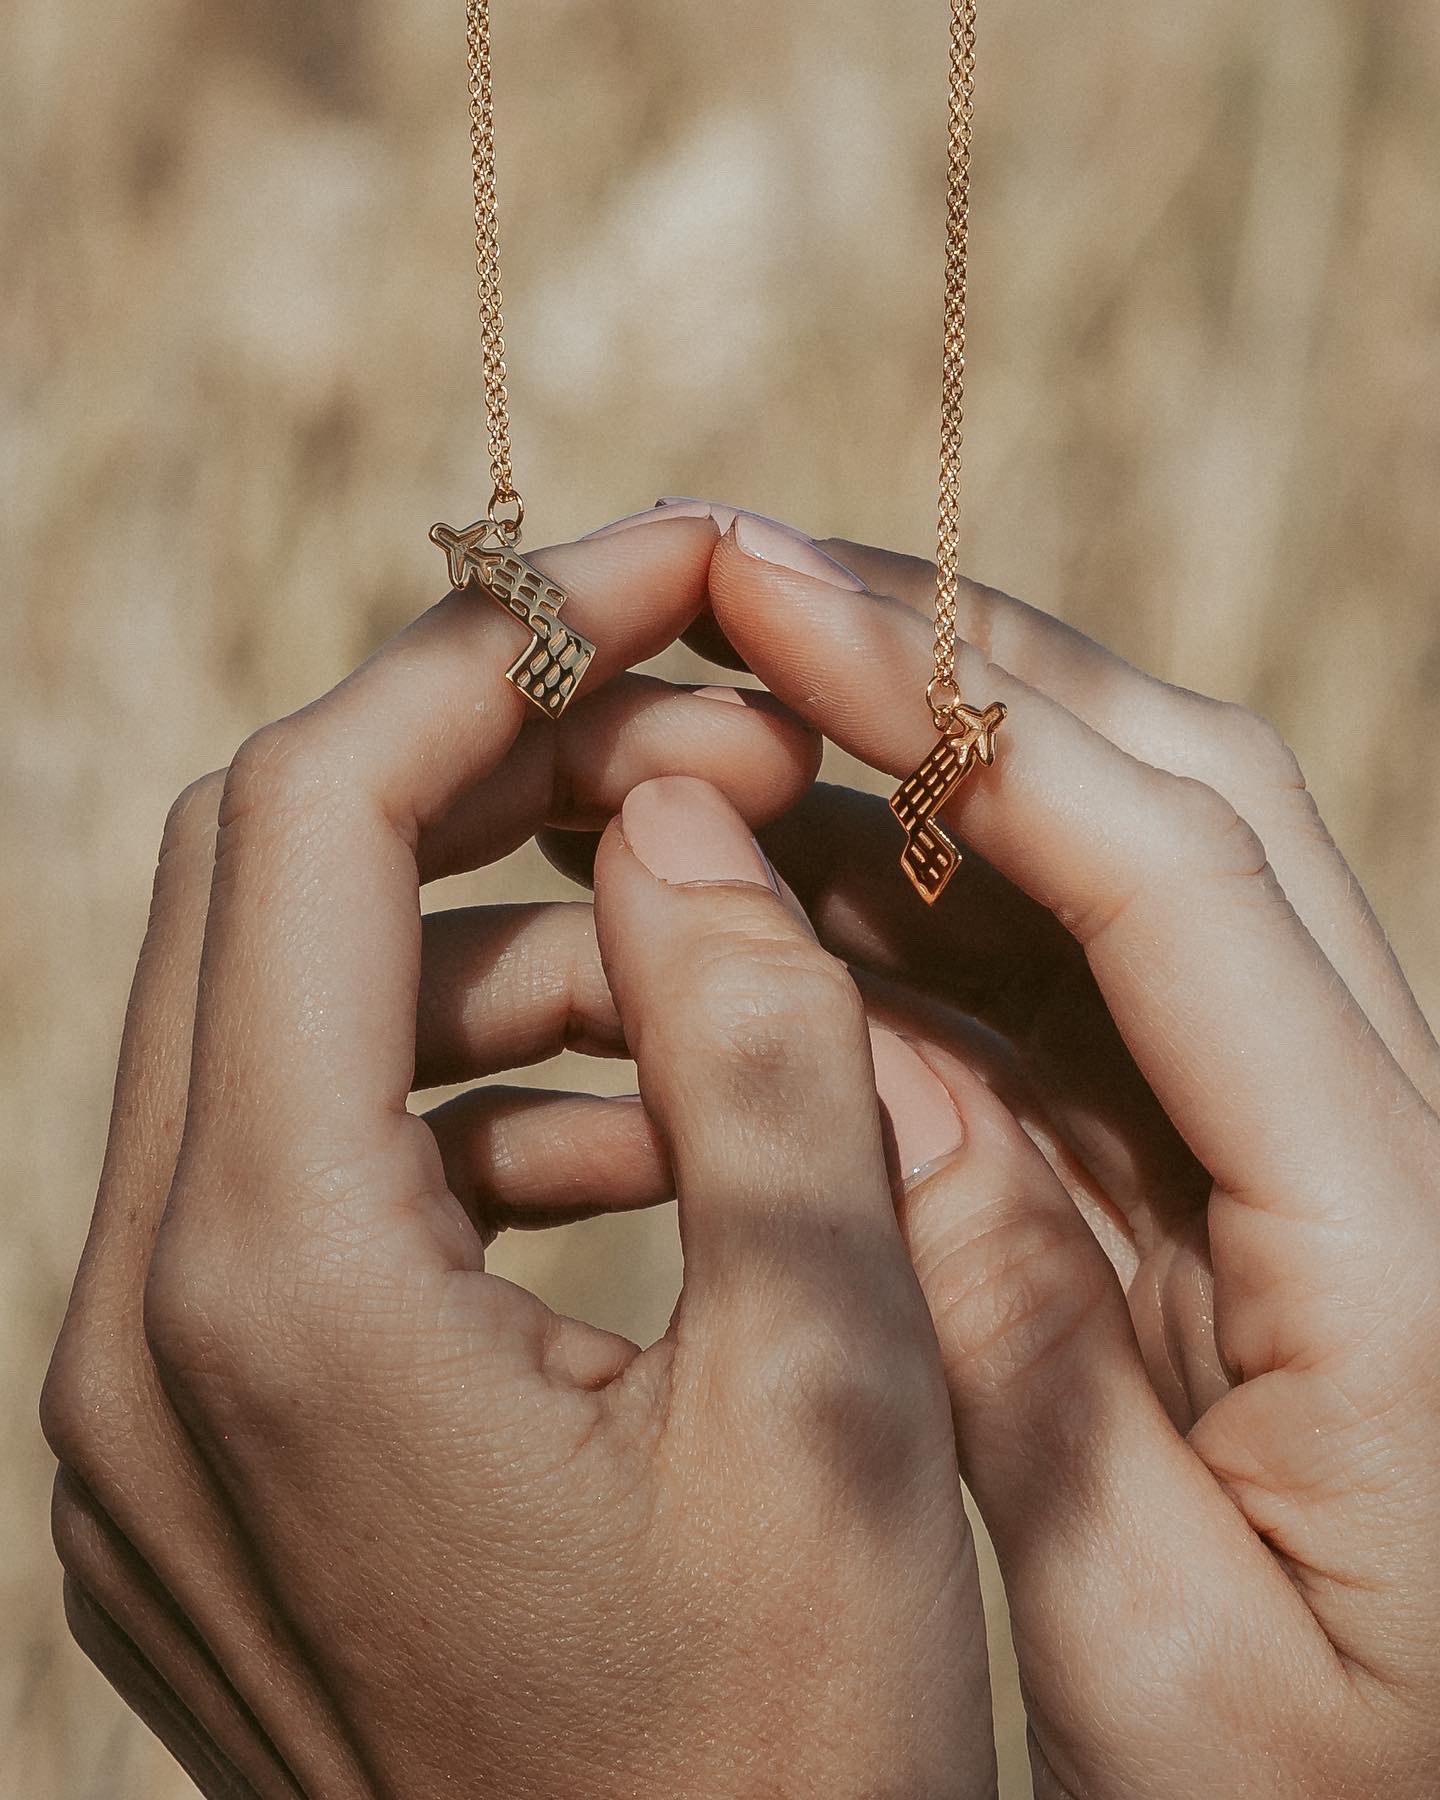 Soulmates in gold - 2 pieces from ZOLDI jewels shop